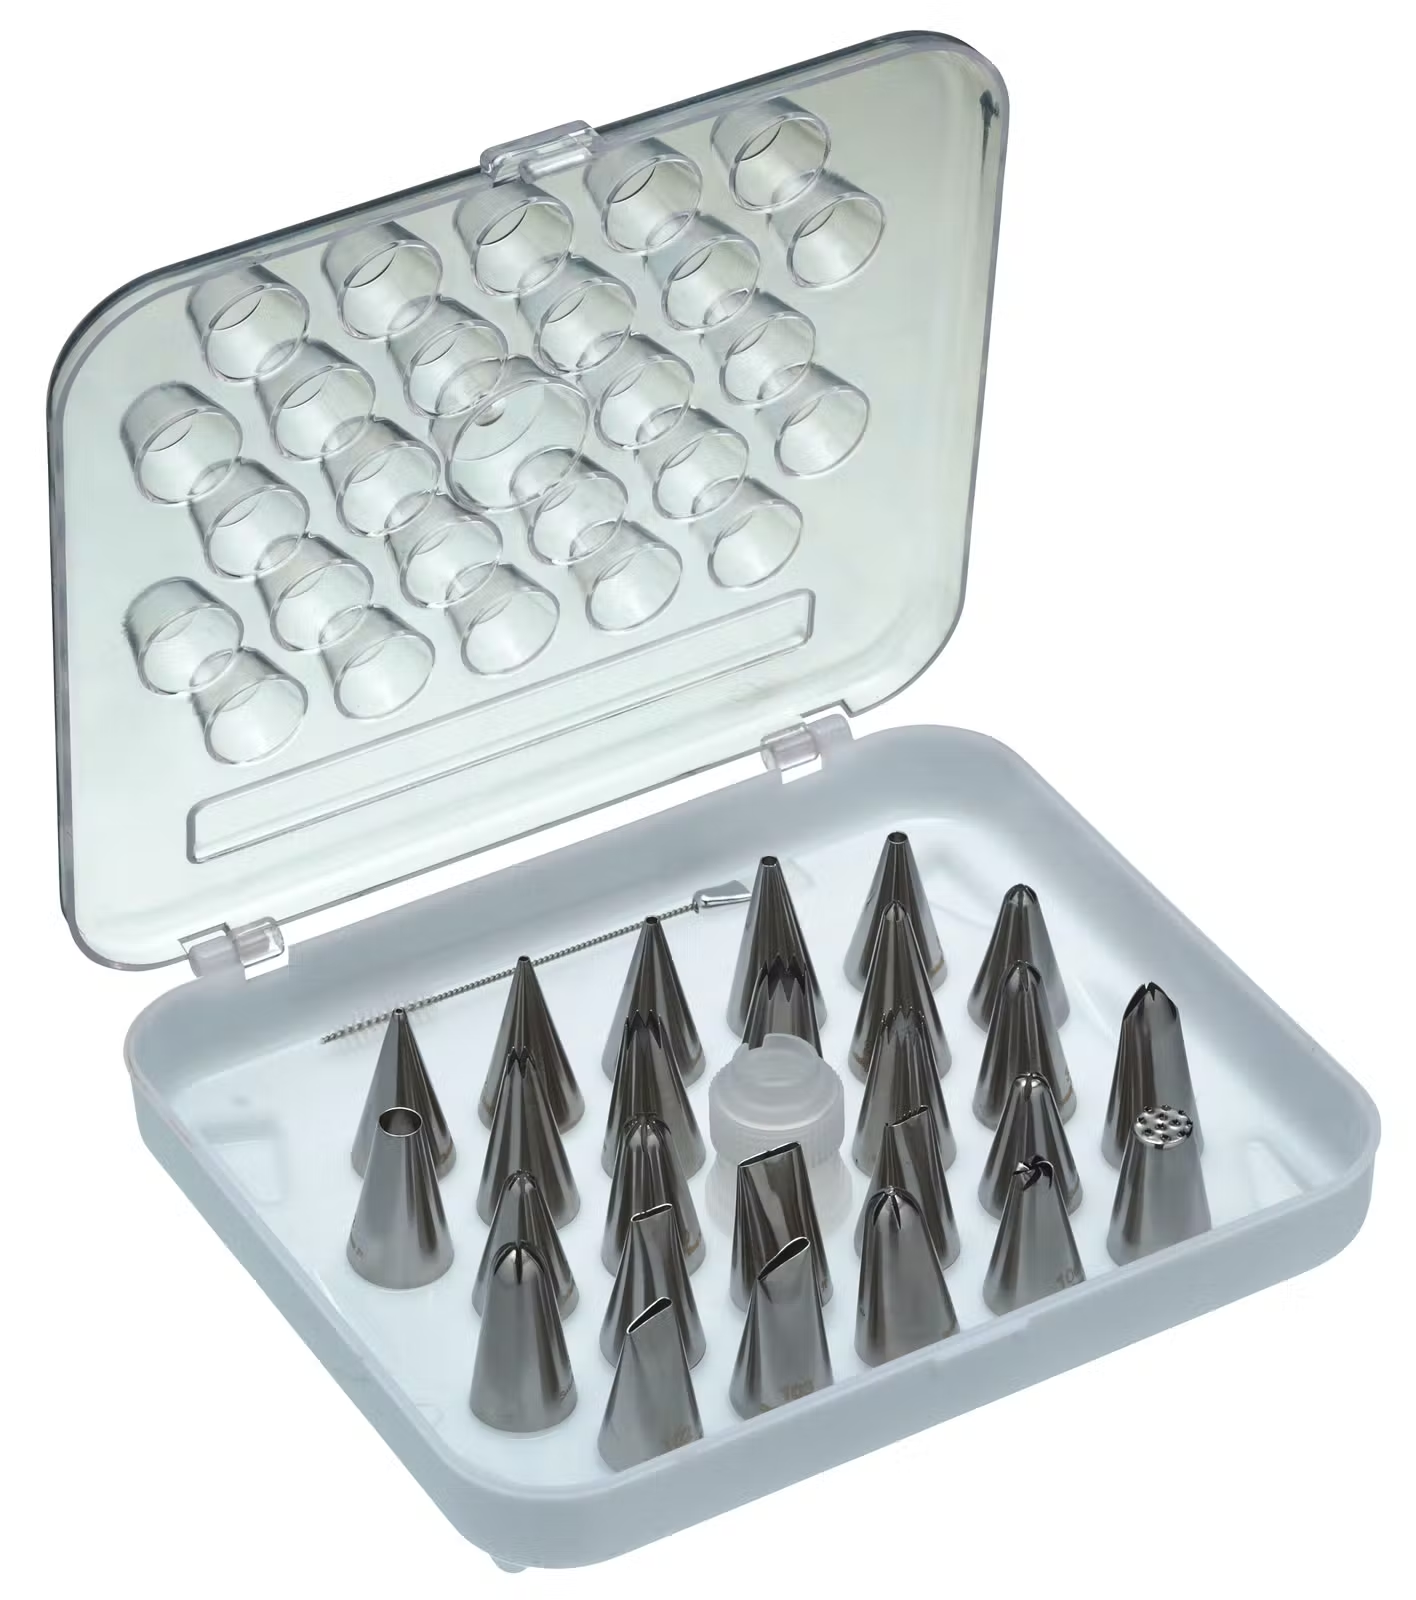 Sweetly Does It Icing Piping Nozzle Tip Set with Storage Case